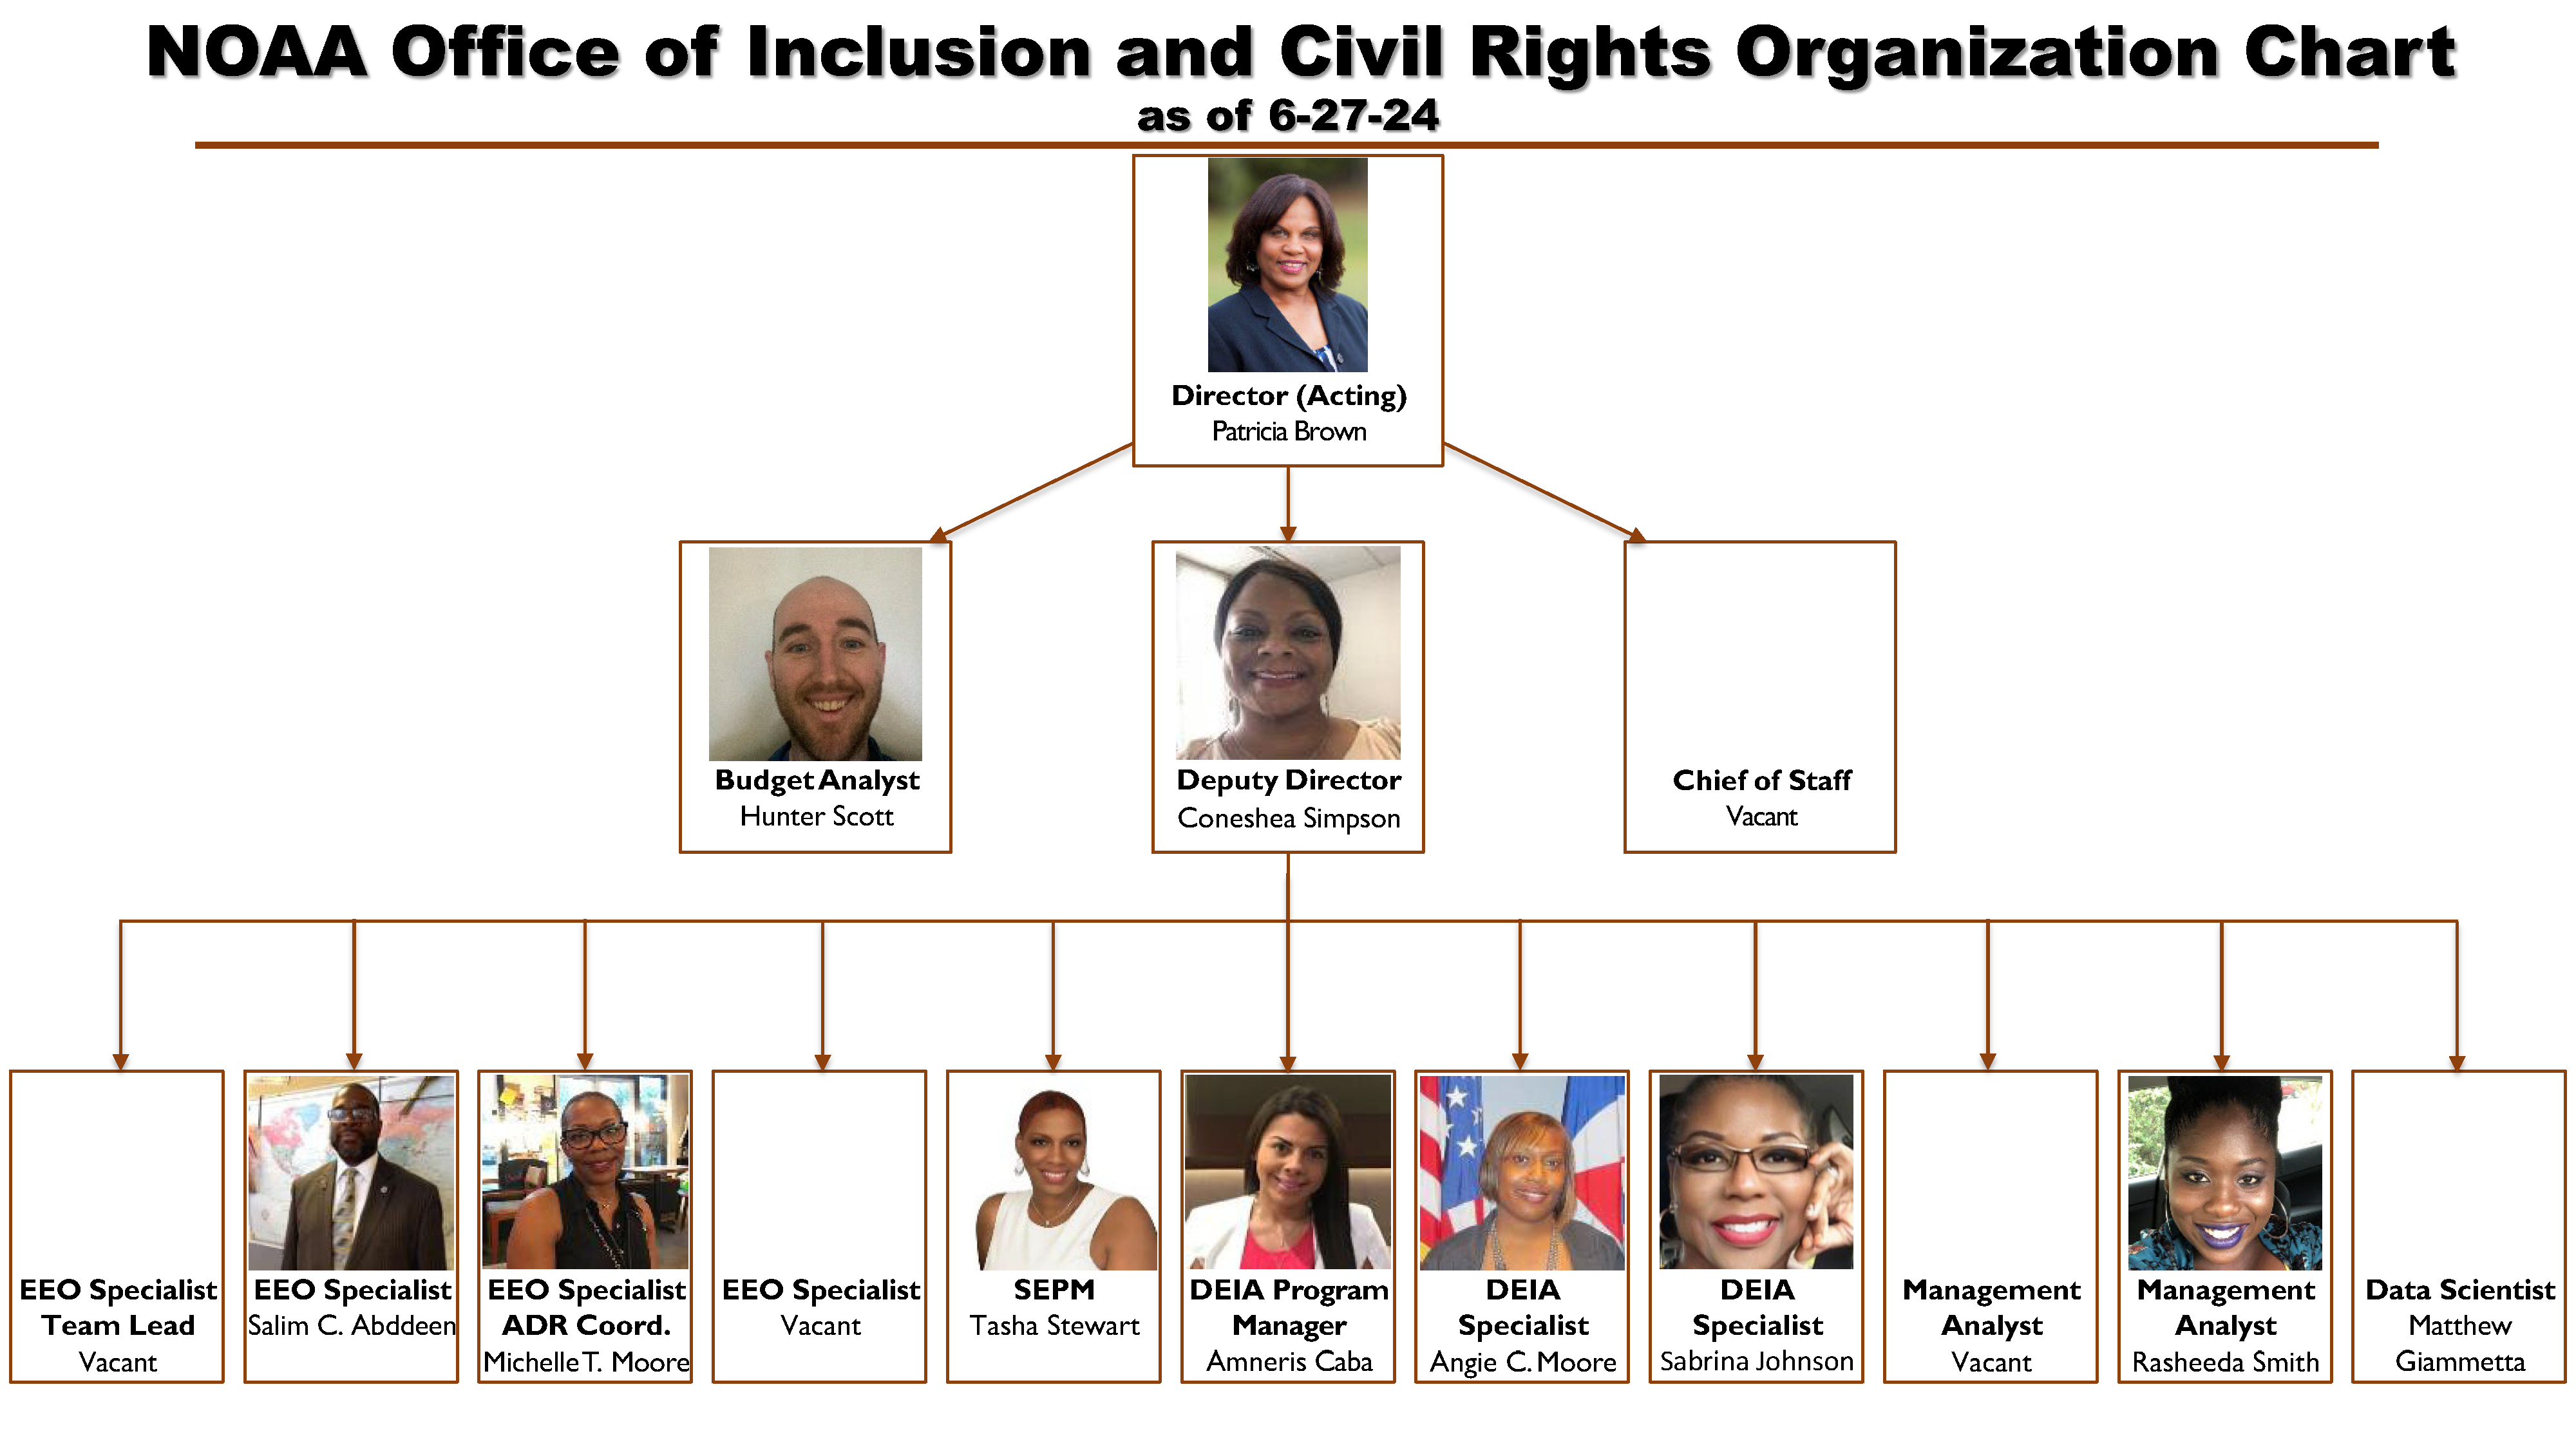 NOAA's Office of Inclusion and Civil Rights Organization Chart_Names are below